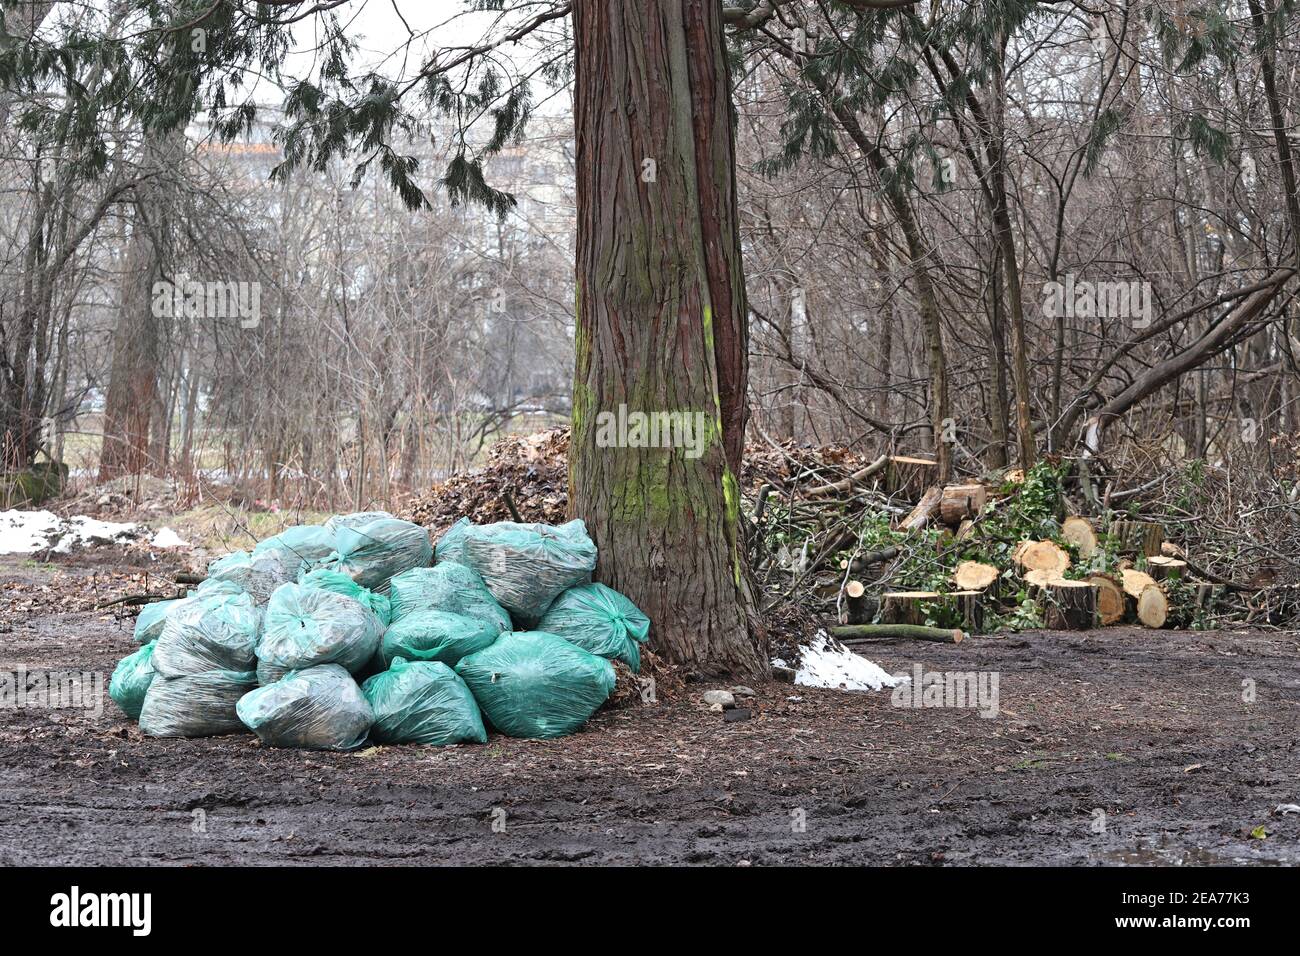 Plastic garbage bags and cut down trees thrown in nature Stock Photo